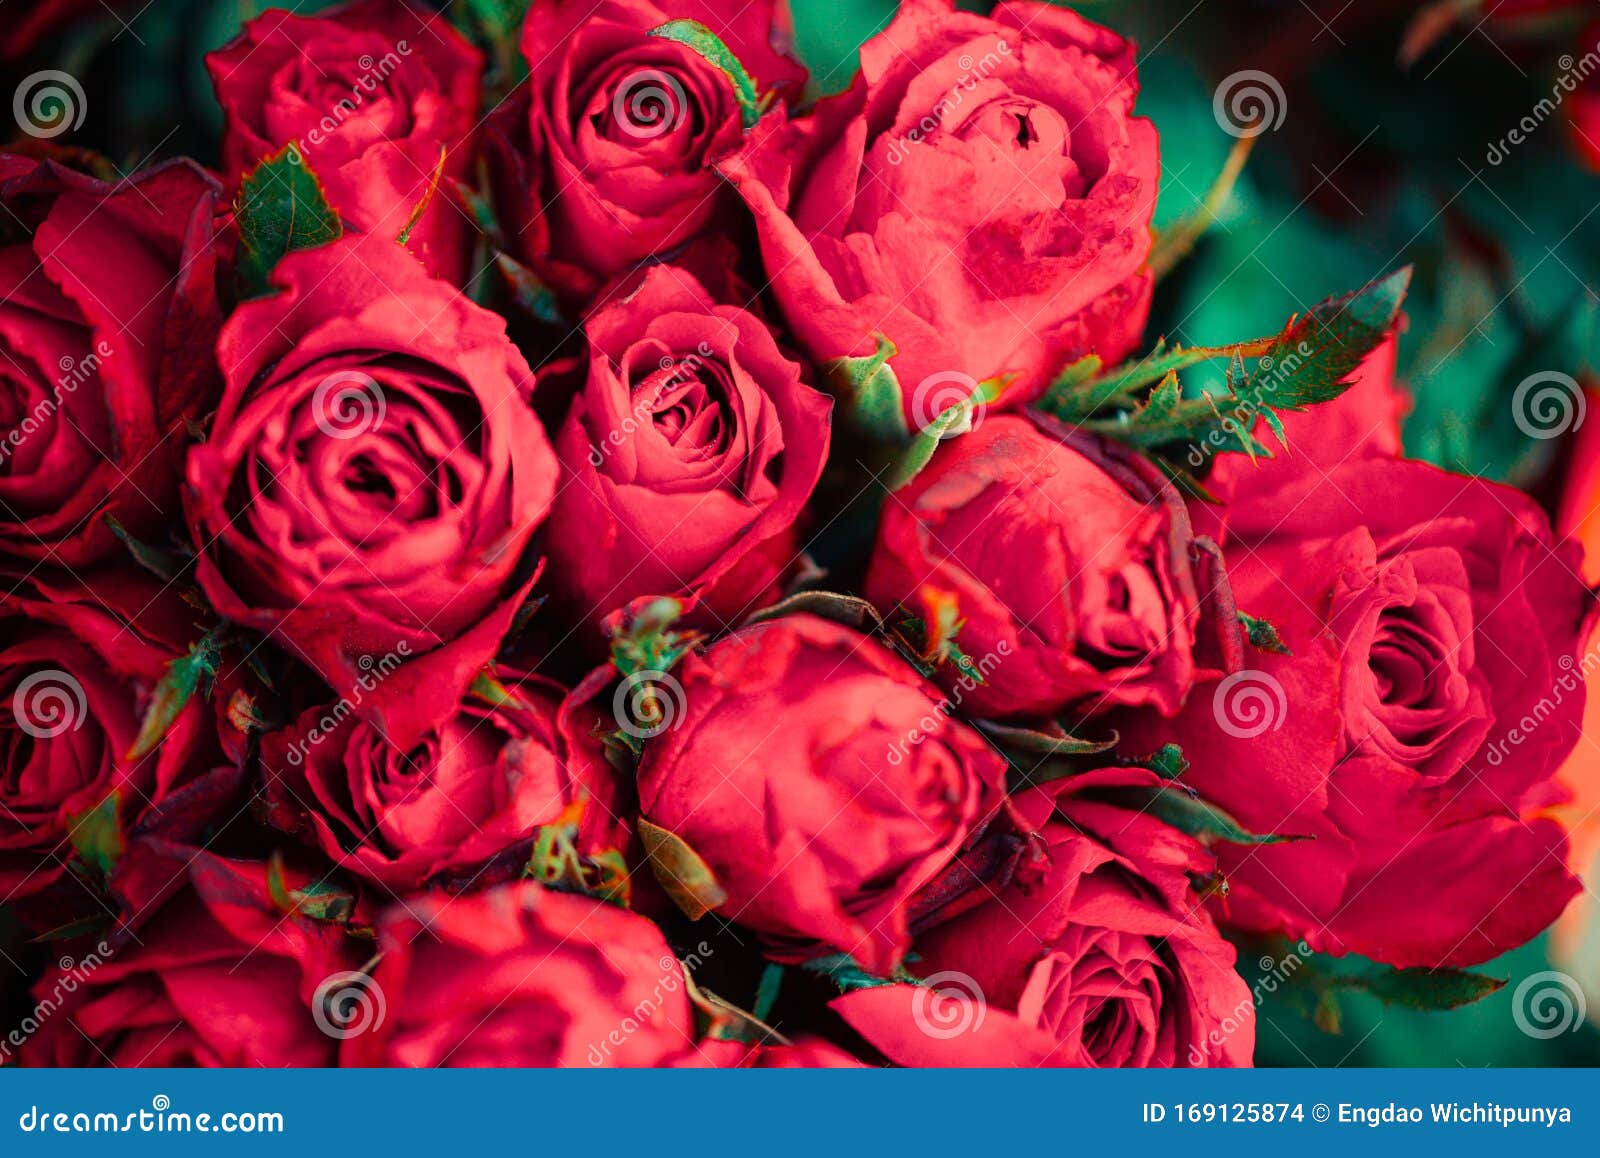 Natural Fresh Red Roses Flower Bouquet - Close Up Rose Background ...